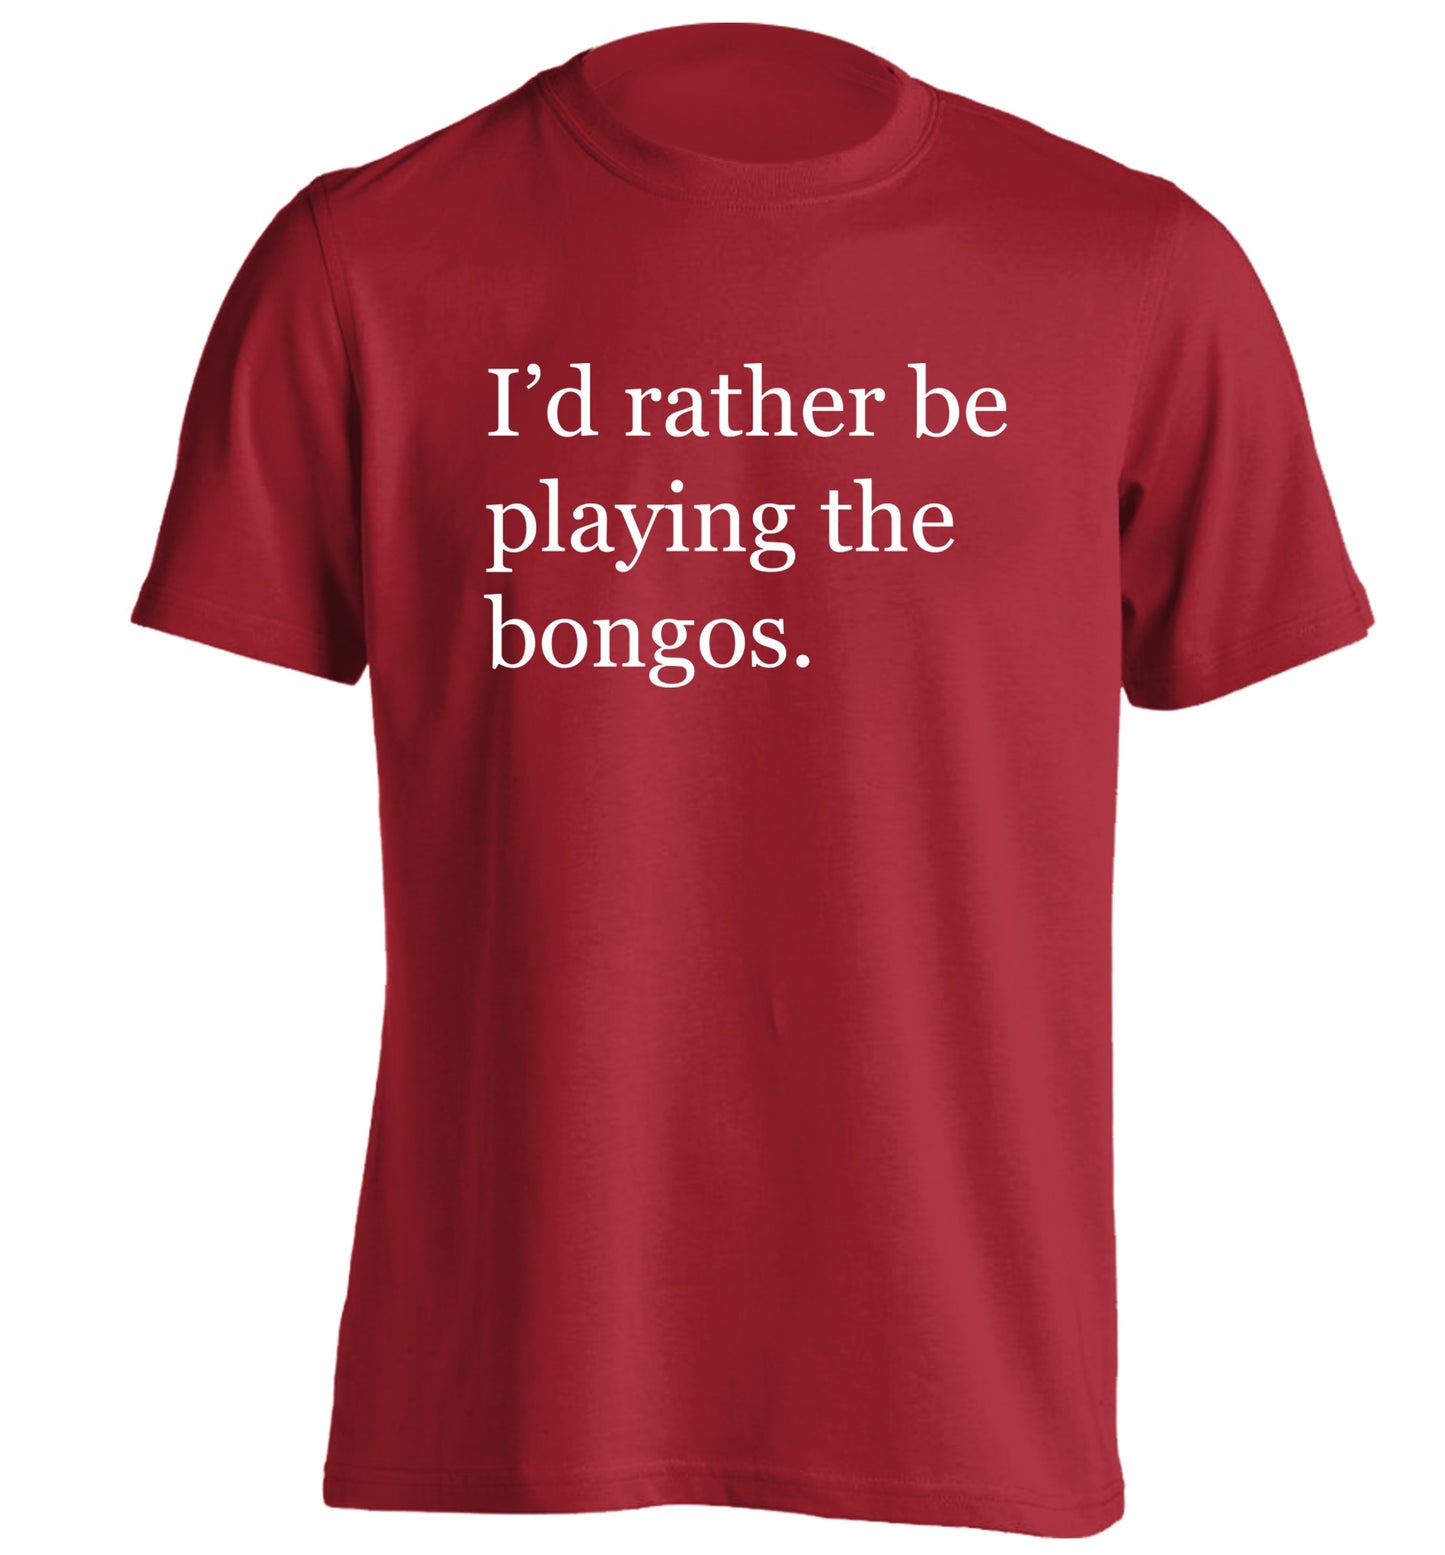 I'd rather be playing the bongos adults unisexred Tshirt 2XL